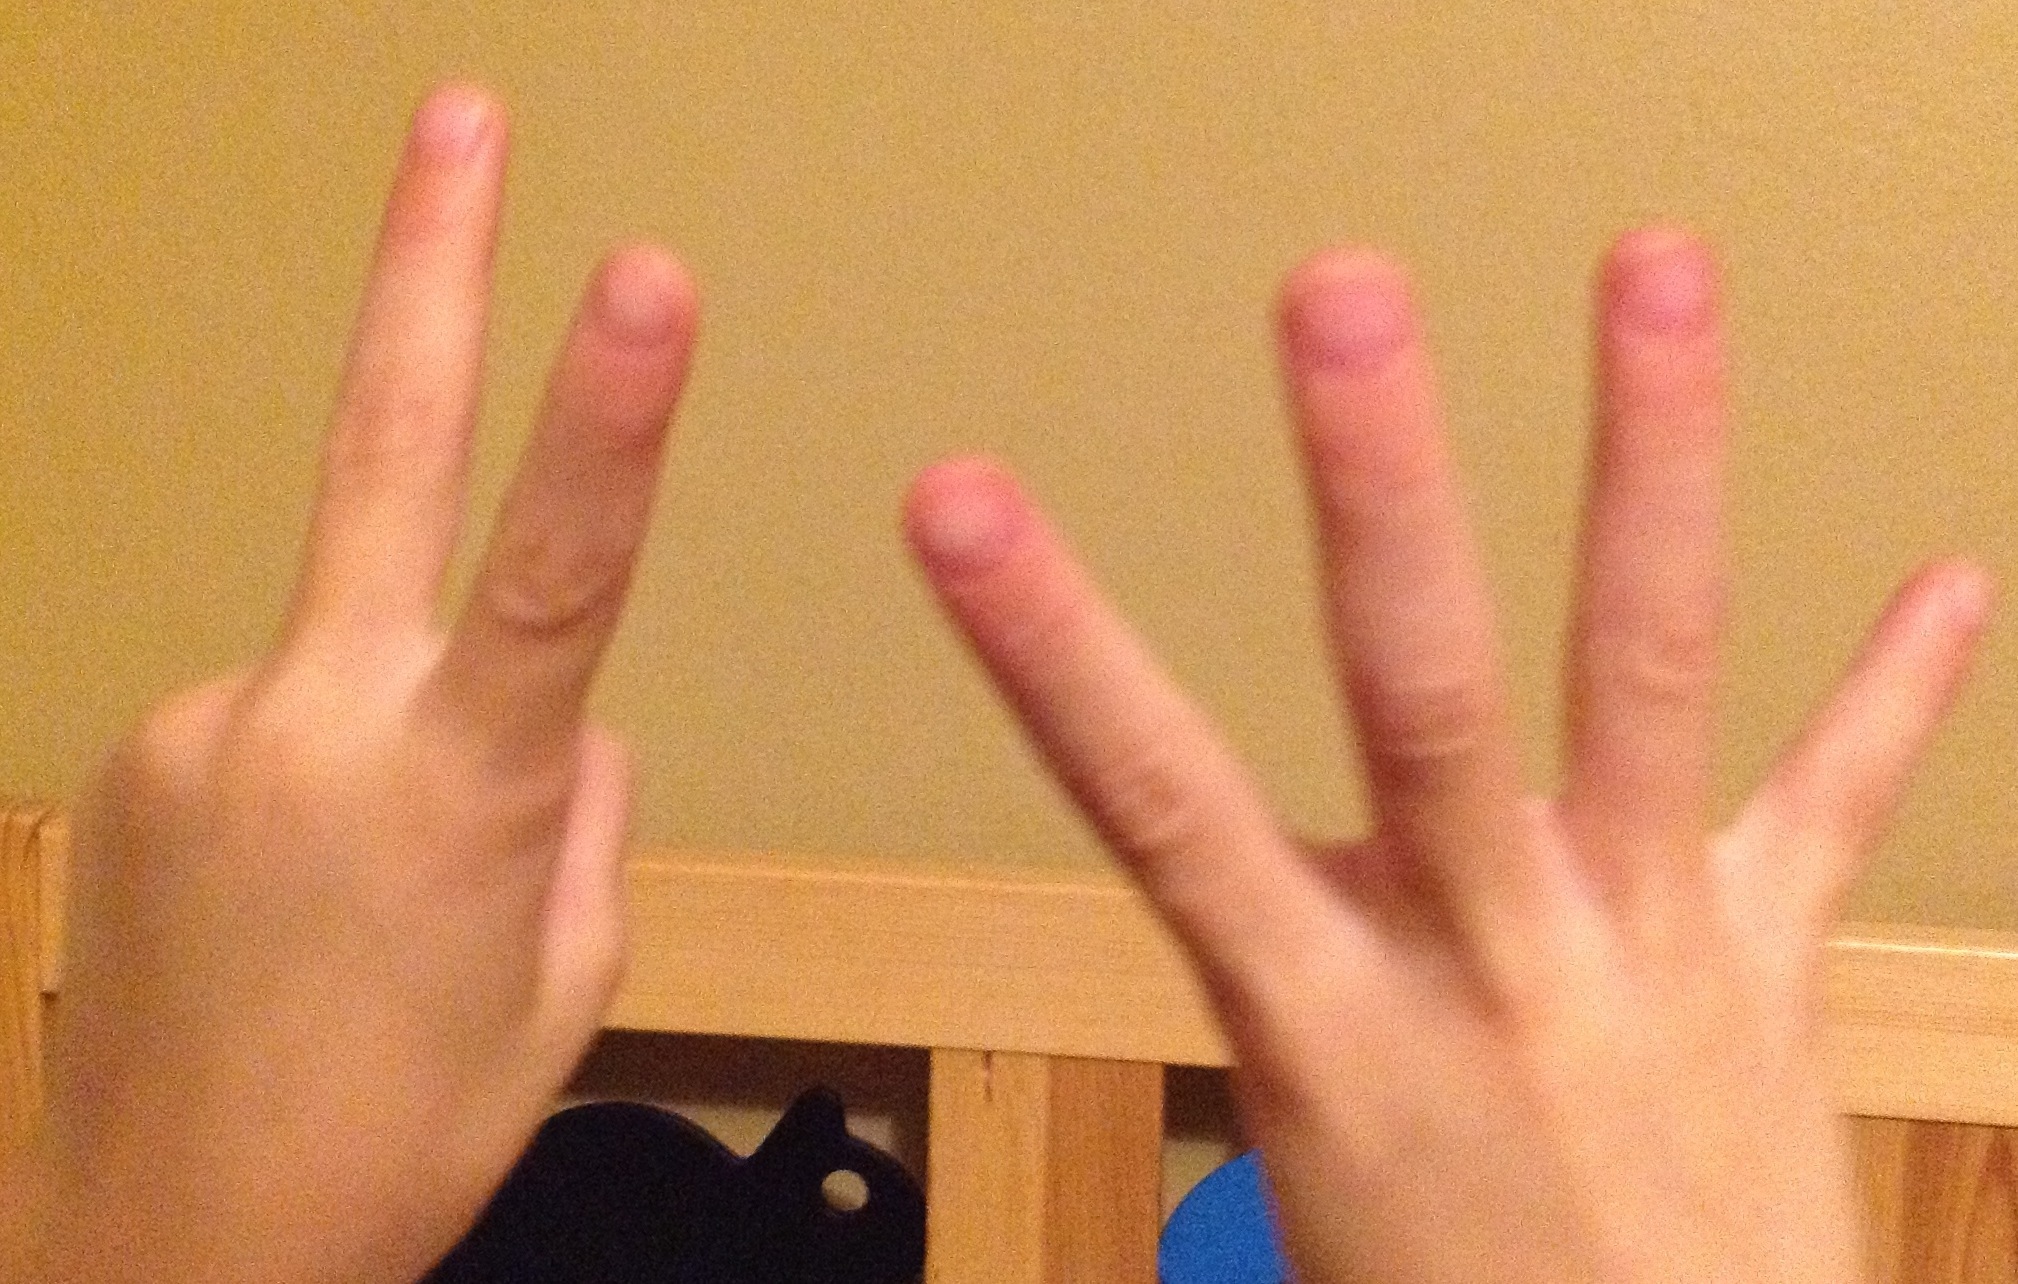 These are my daughter's fingers. I did not photograph the children on the subway.